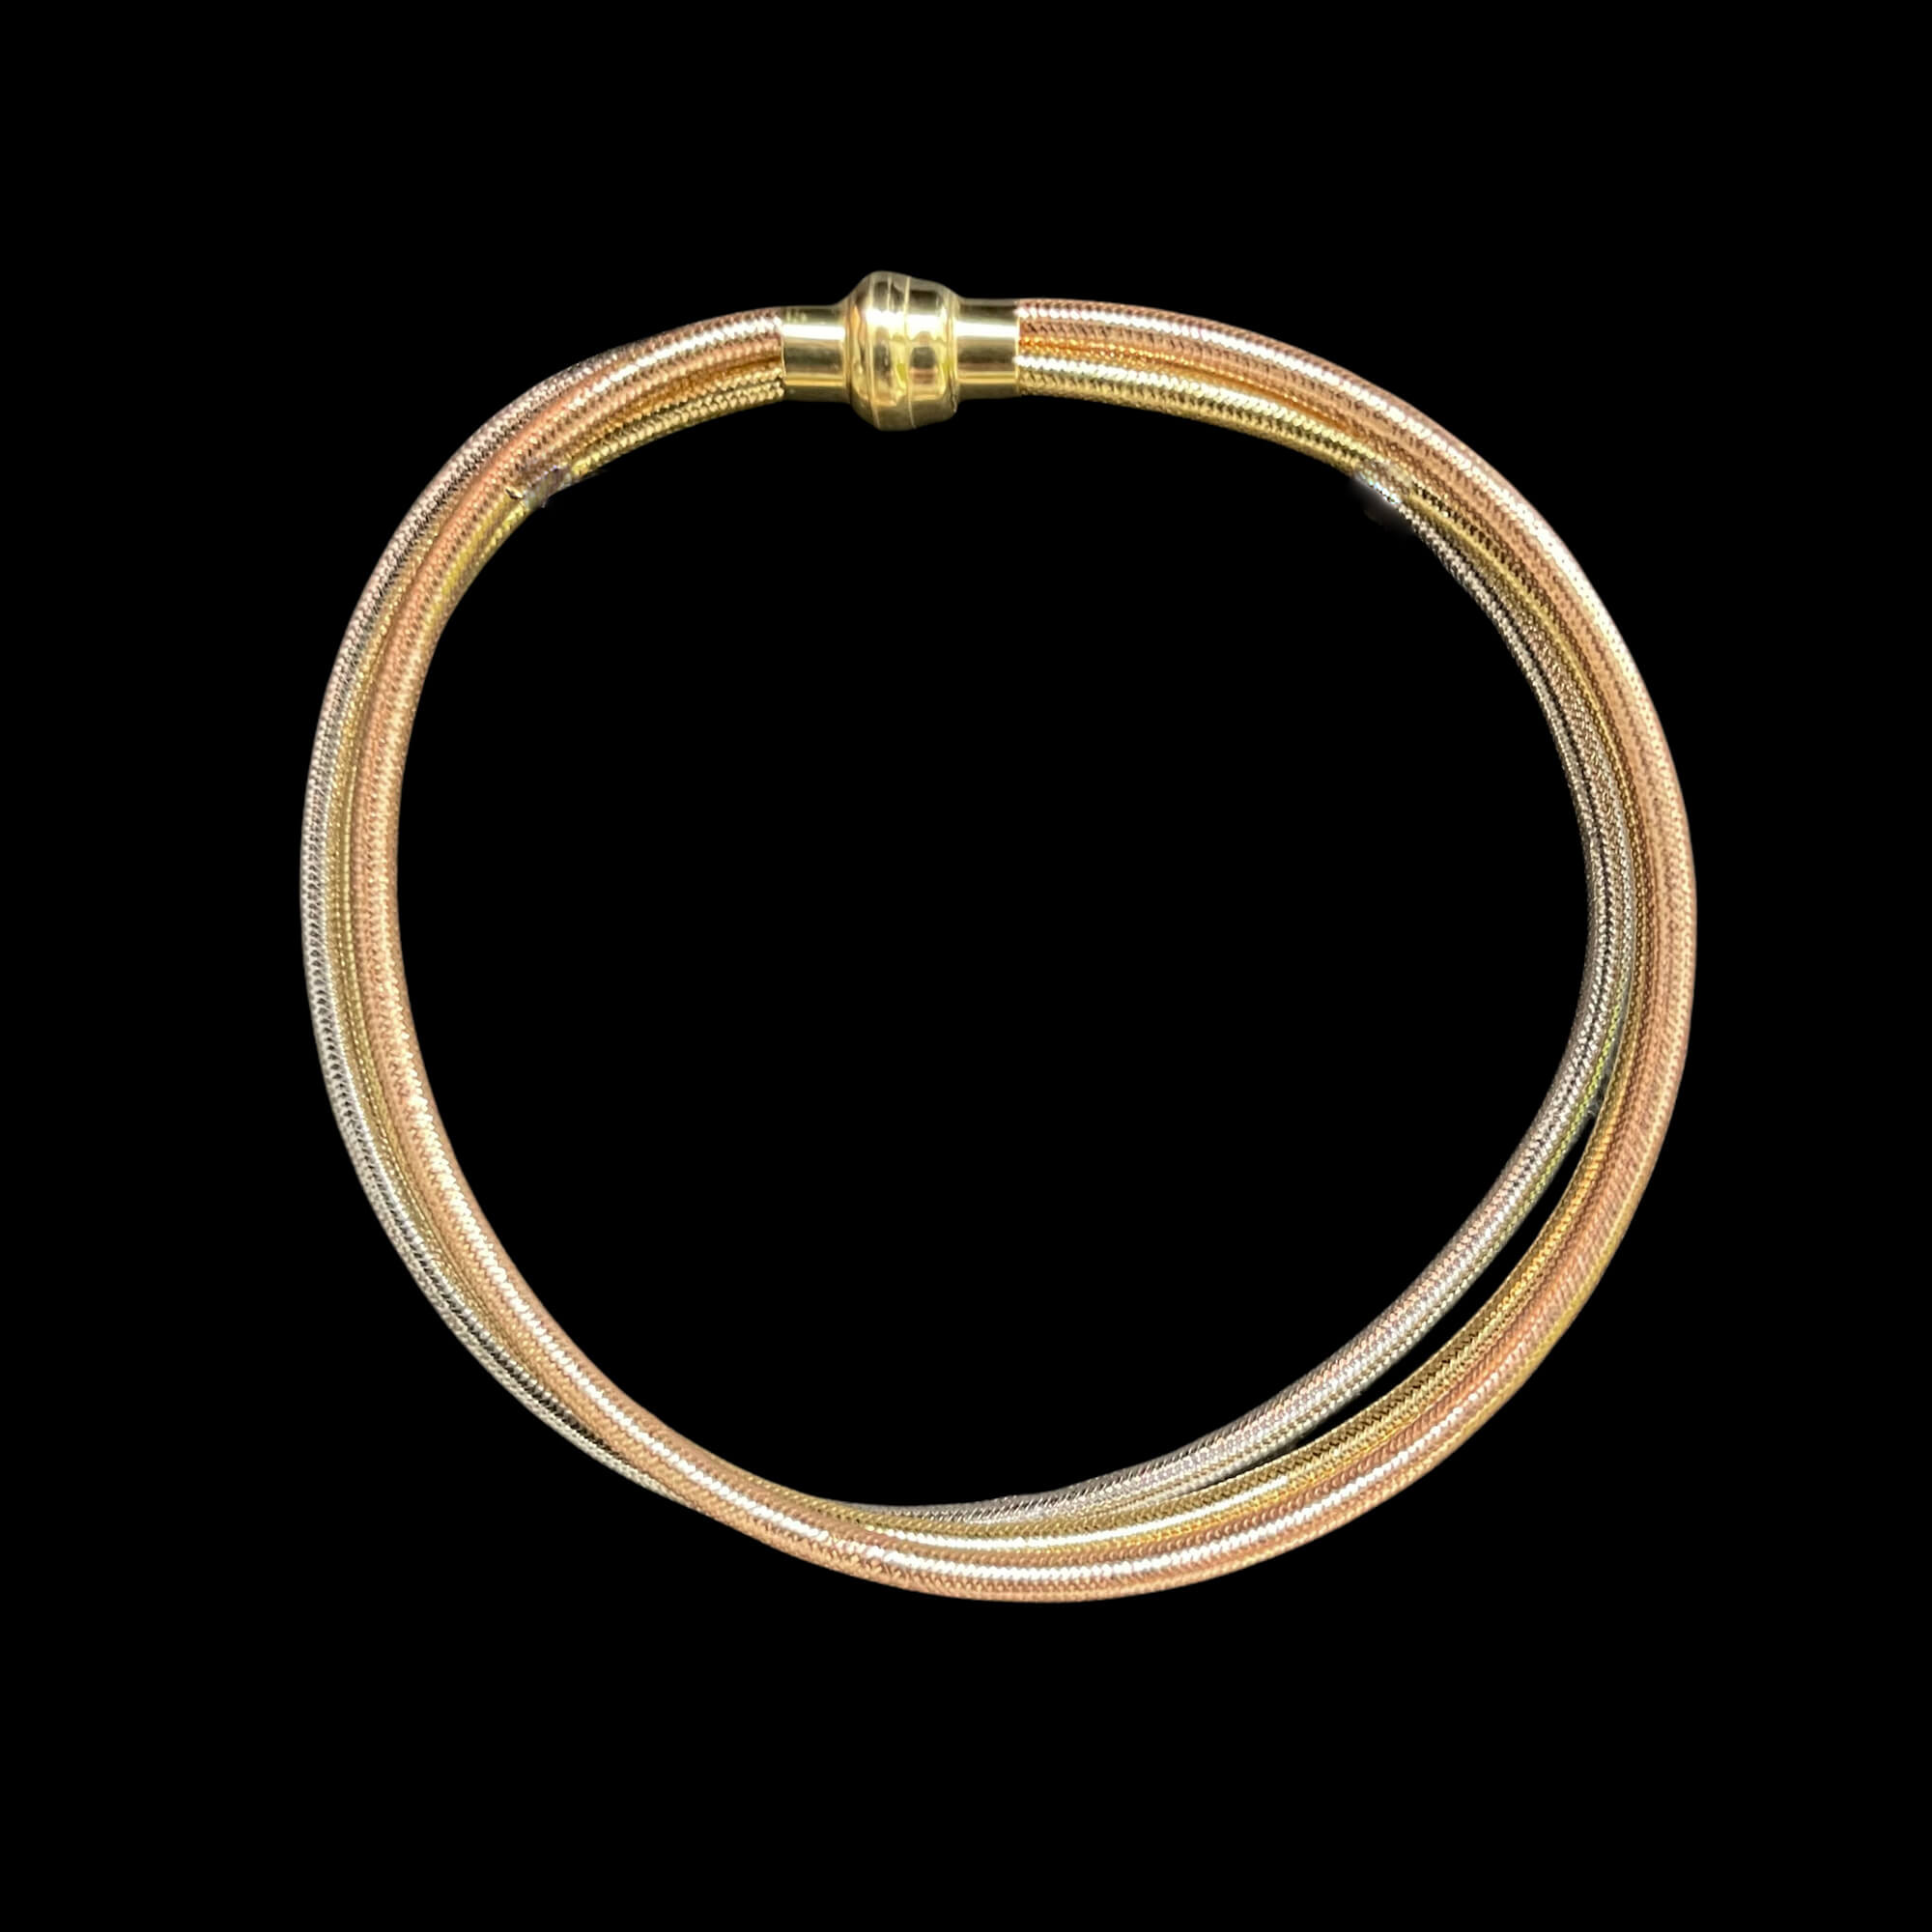 Three-row omega bracelet made of 3-color gold 18kt and silicone